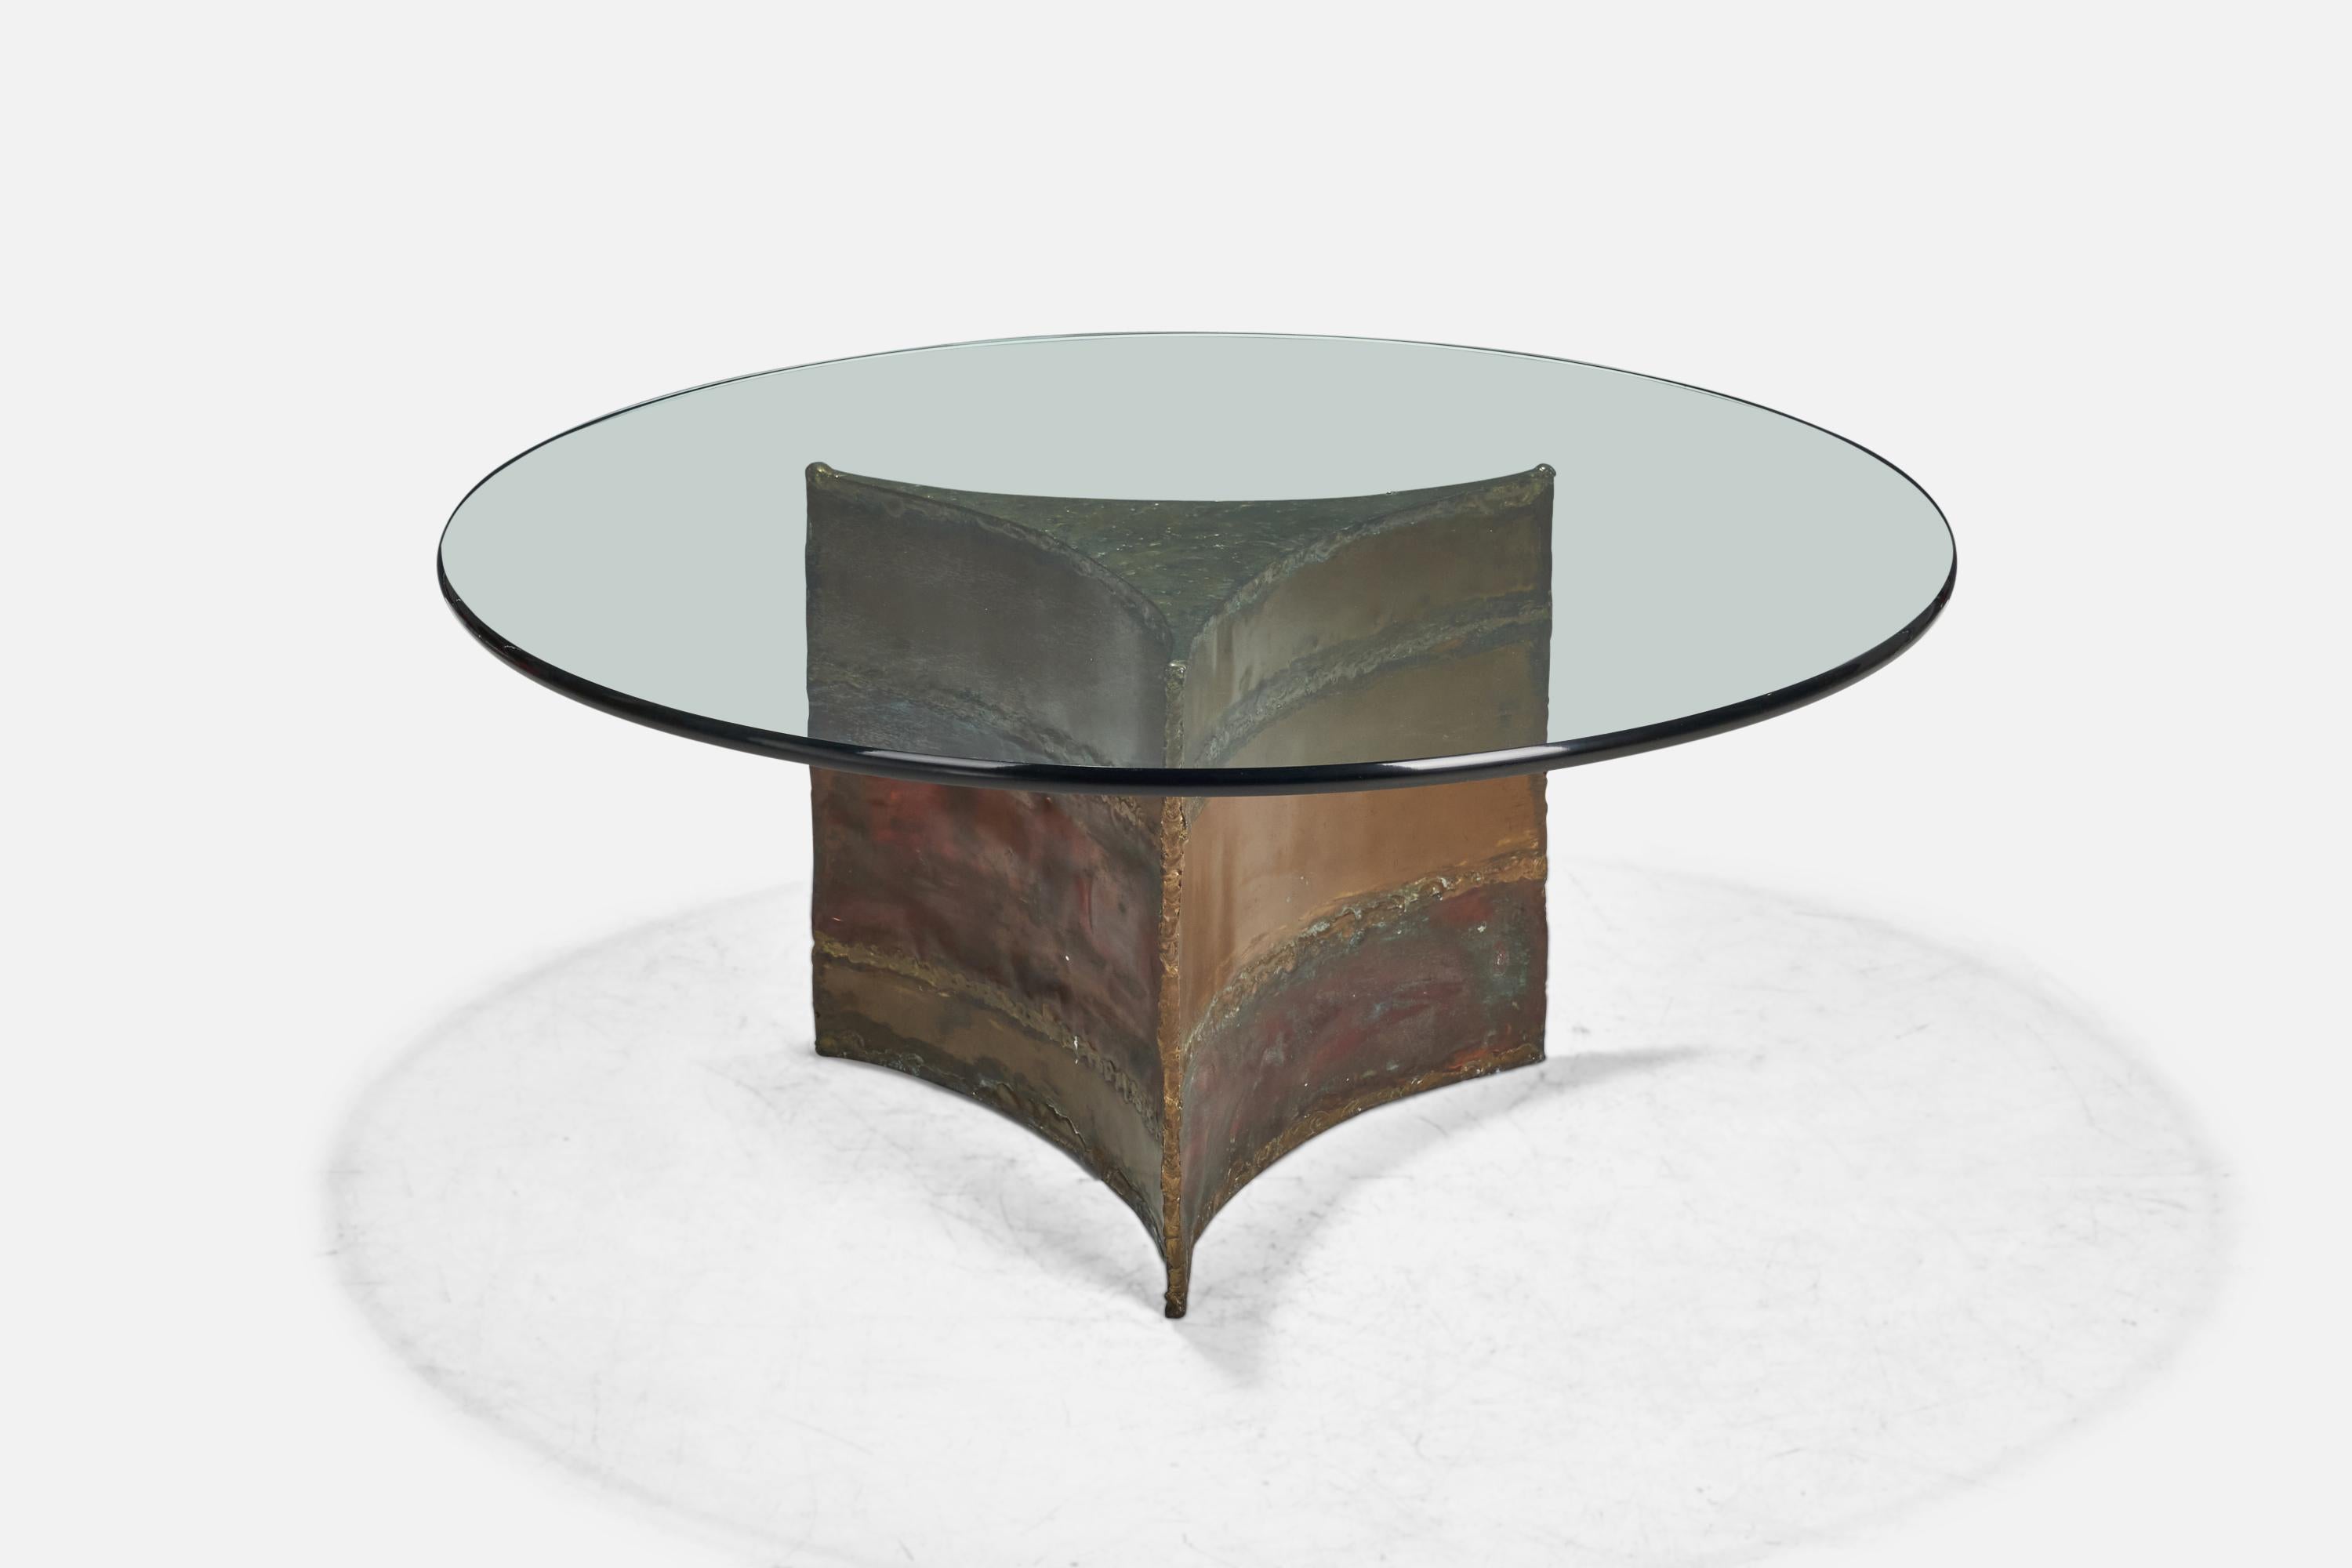 An enamelled metal and glass coffee table designed by Silas Seandel, Artists Studio, New York, USA, 1970s.